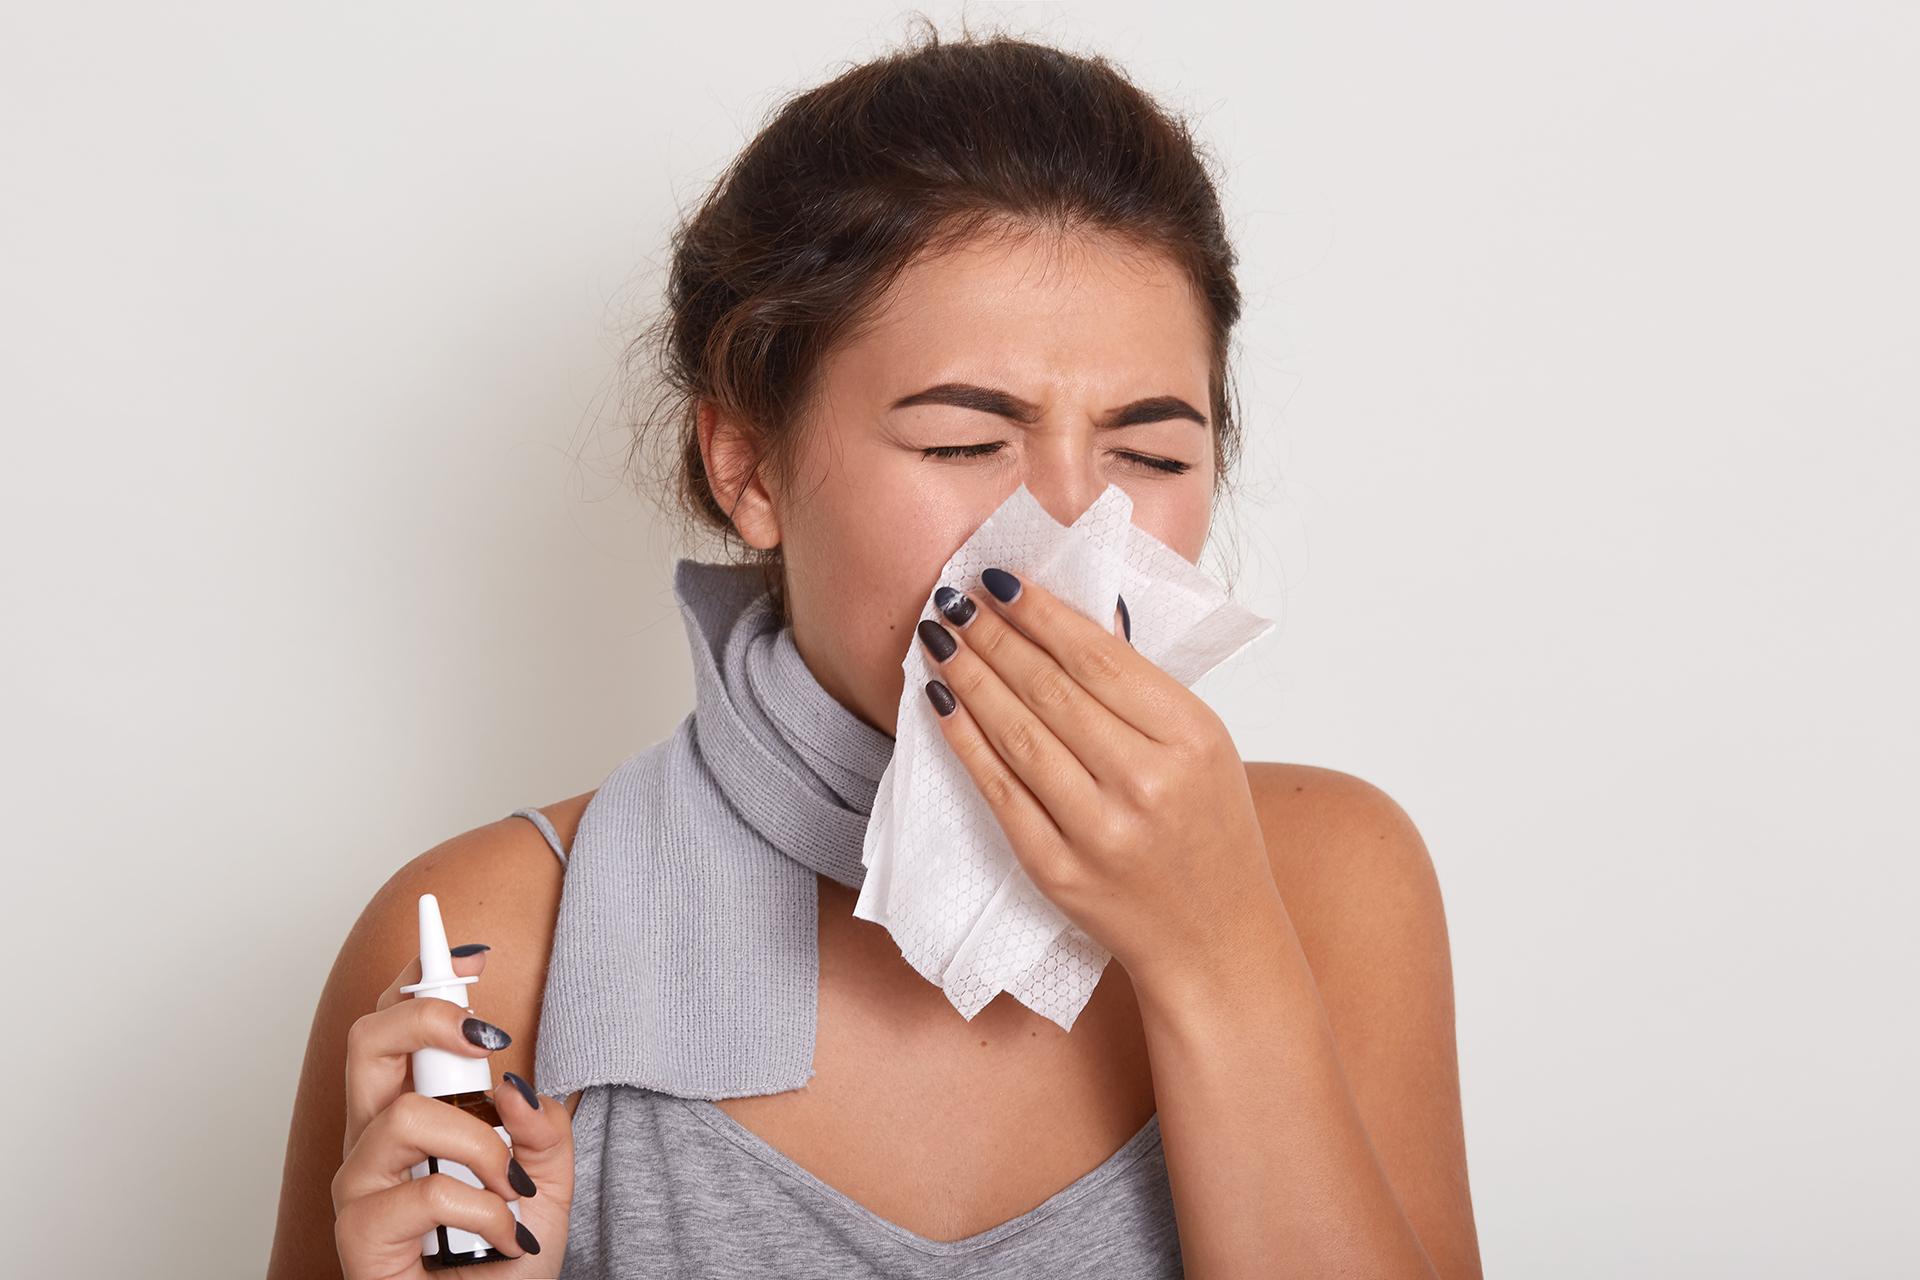 Important Symptoms of Weak Immune System and How to Improve It